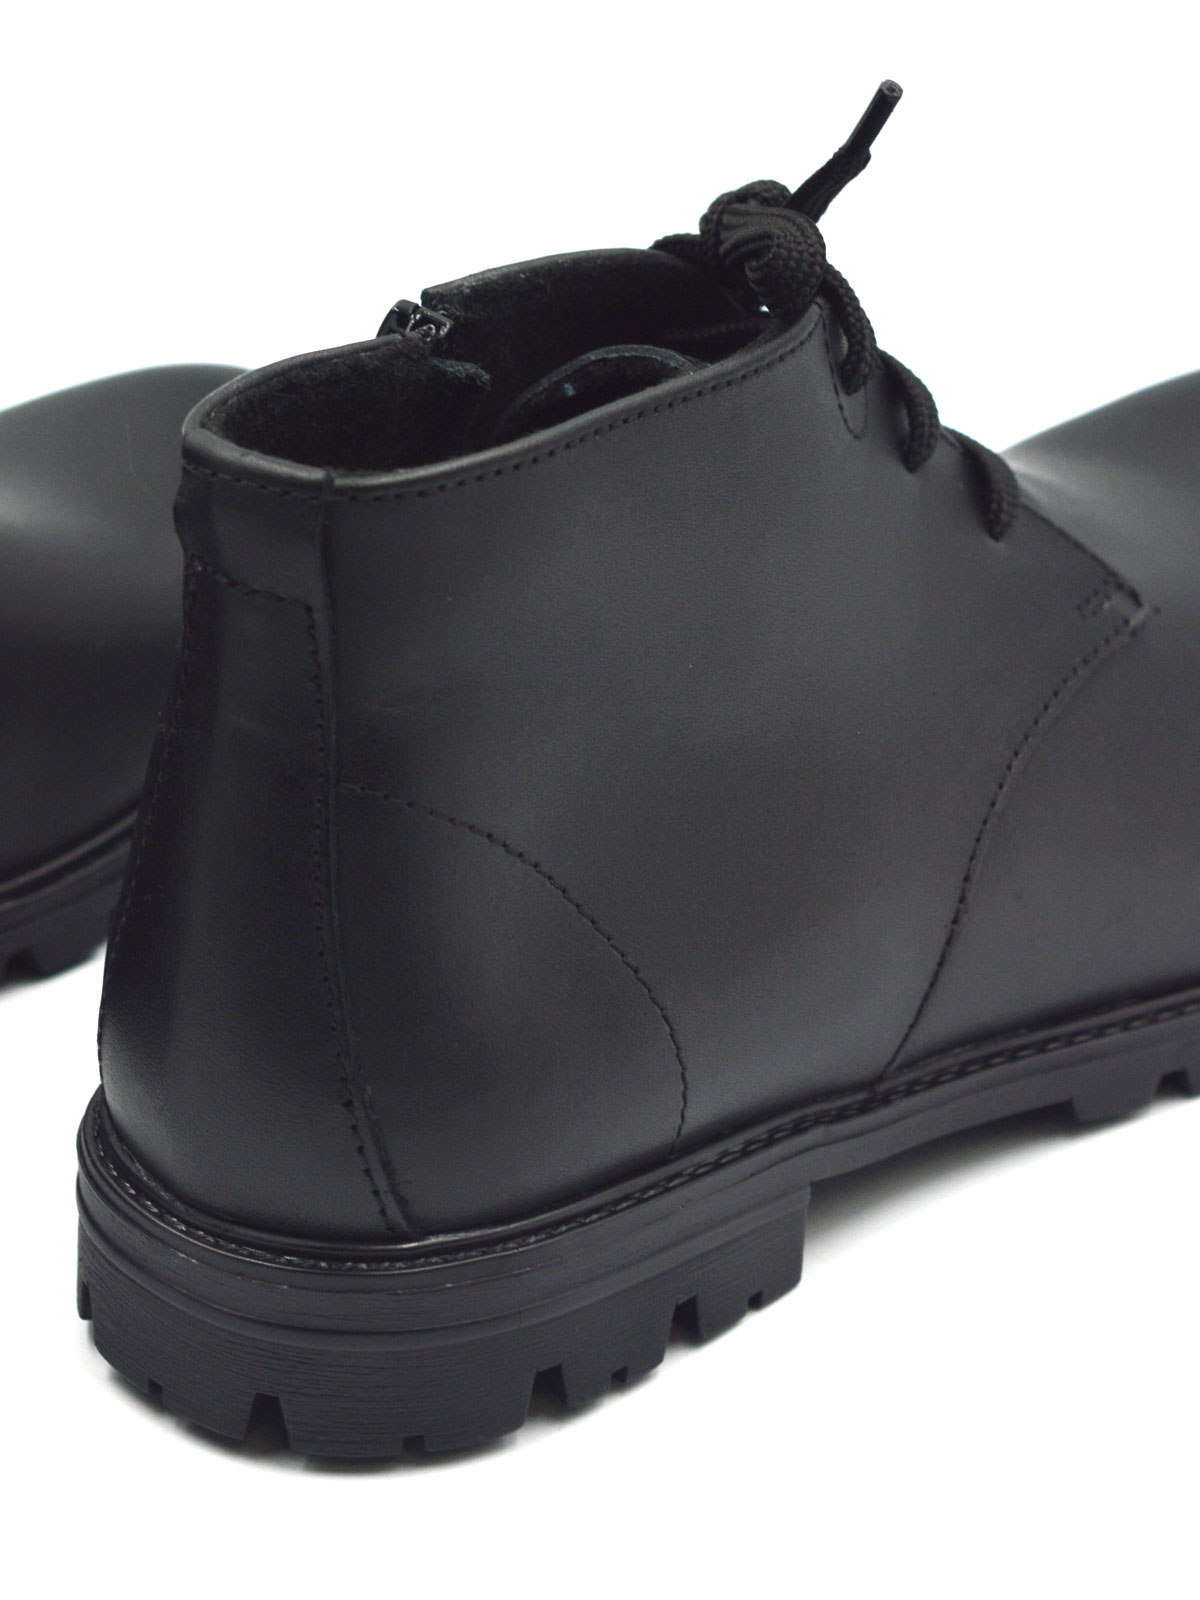 Black sporty elegant boots with laces - 81087 - € 83.24 img3